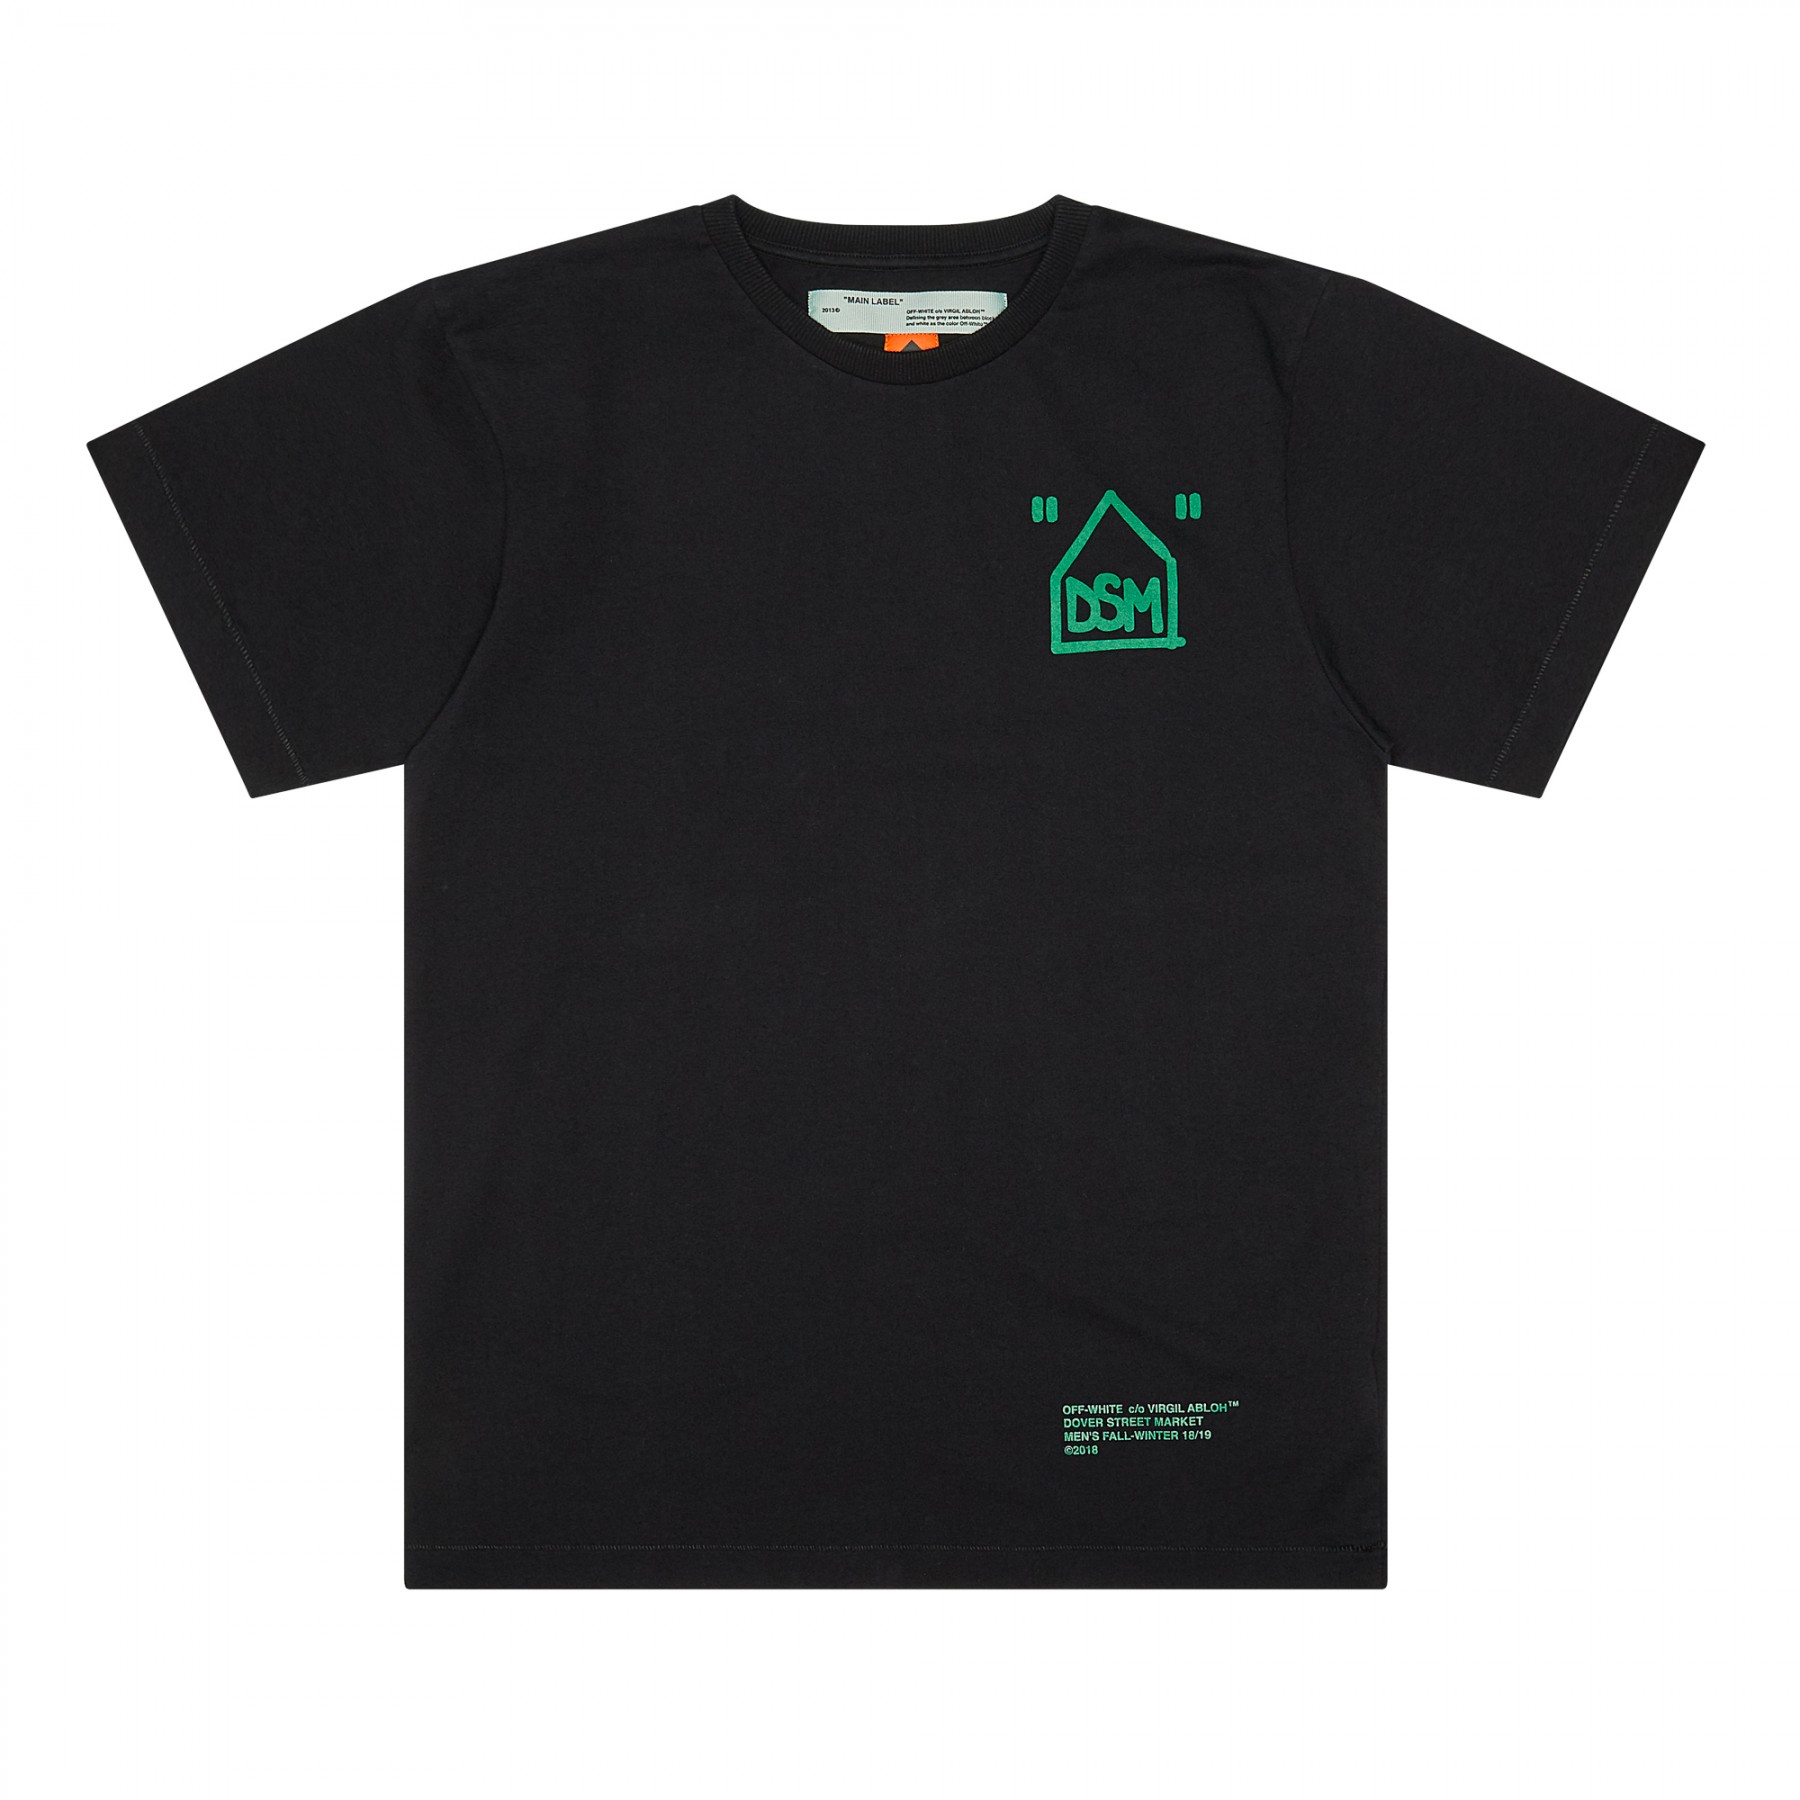 Off-White Redesigns DSM Logo in Exclusive Capsule CollectionEssential ...